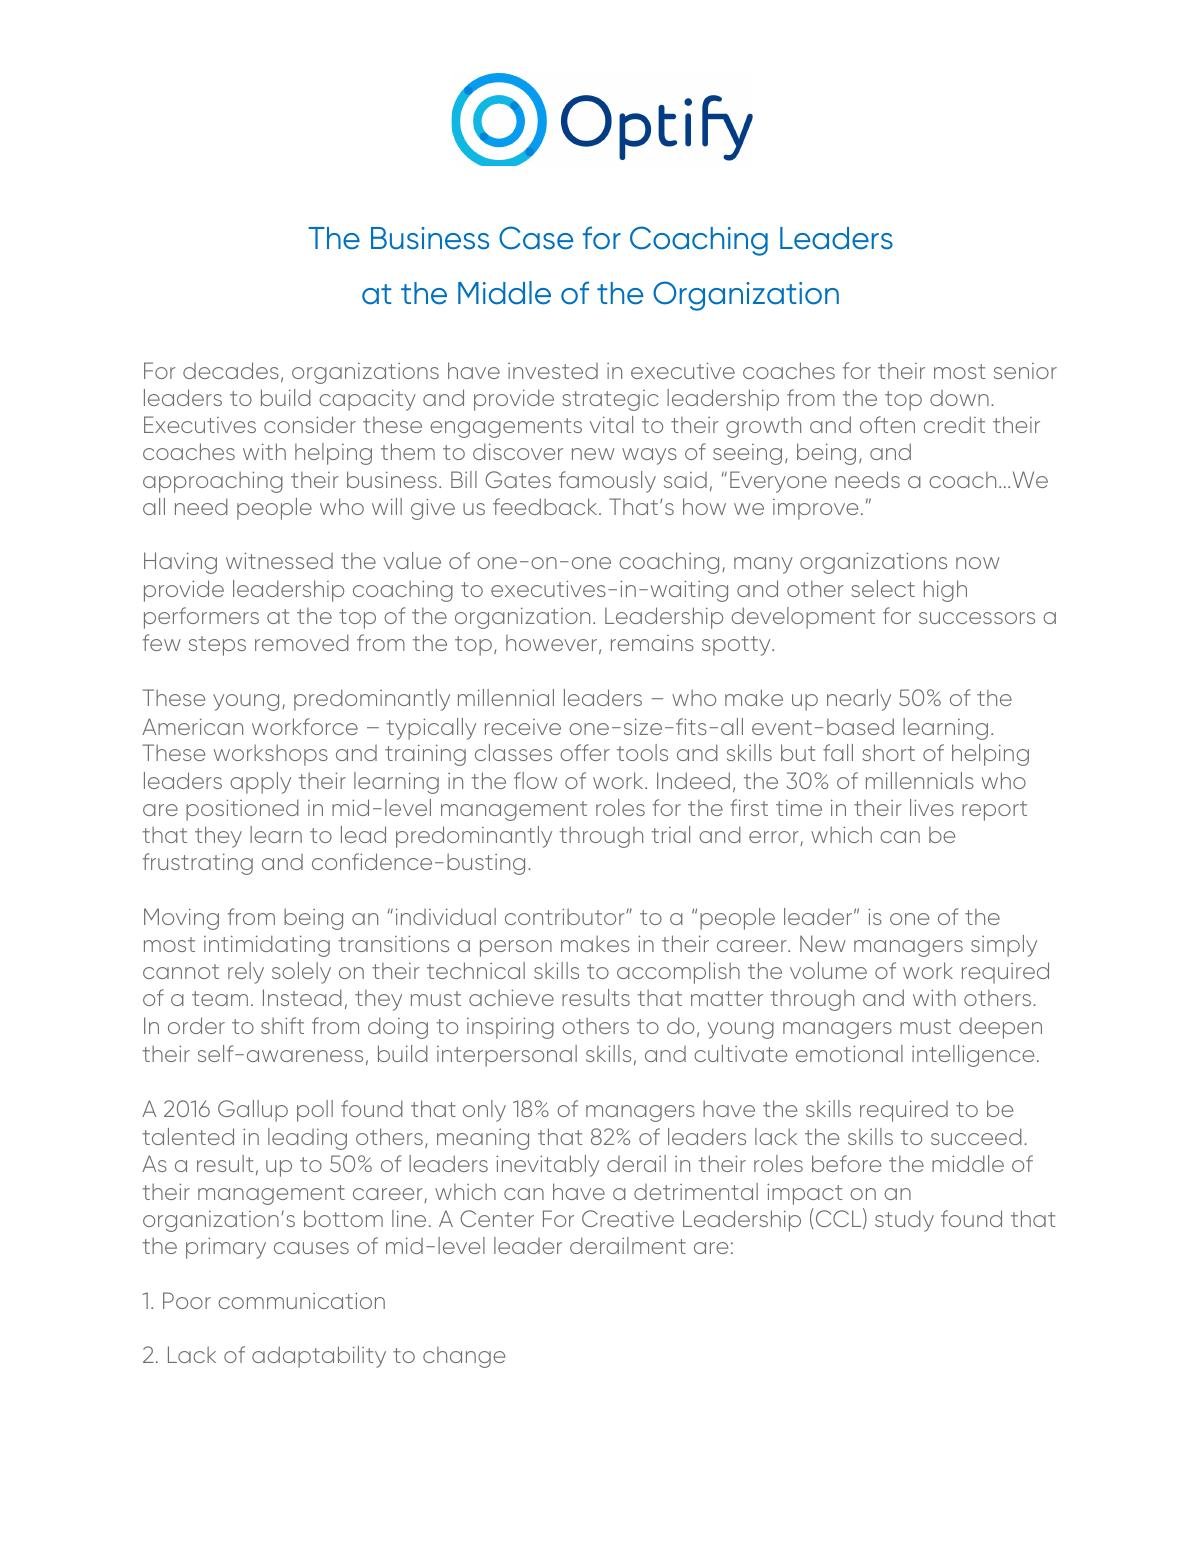 The Business Case for Coaching Leaders at the Middle of the Organization